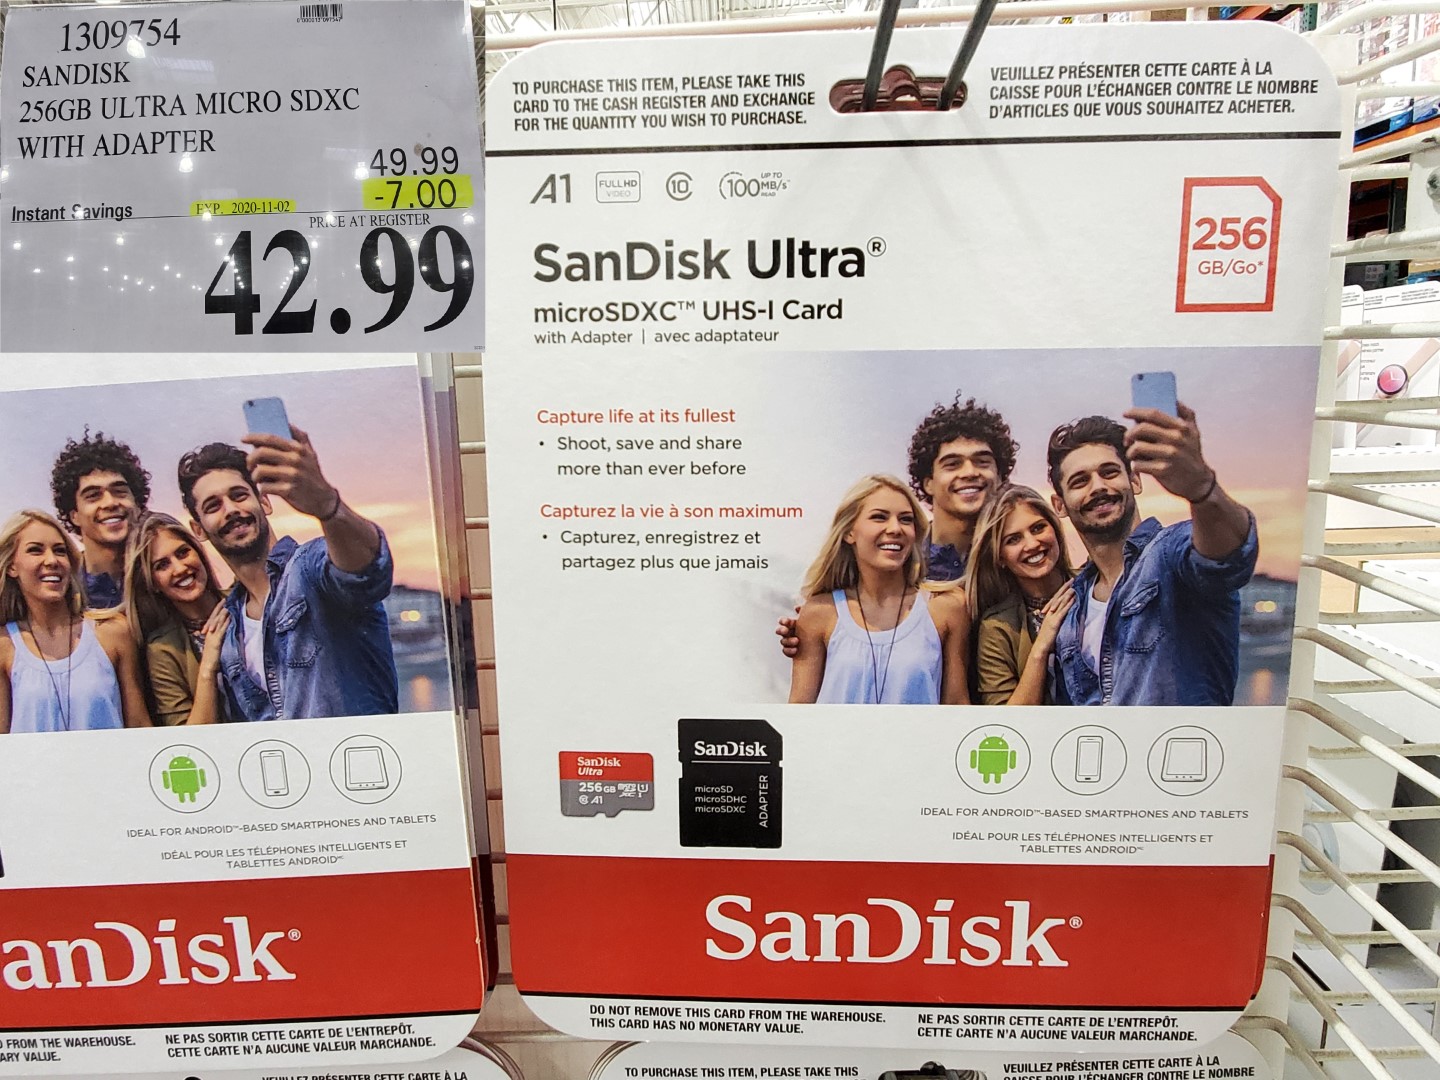 1309754 Sandisk 256gb Ultra Micro Sdxc With Adapter 7 00 Instant